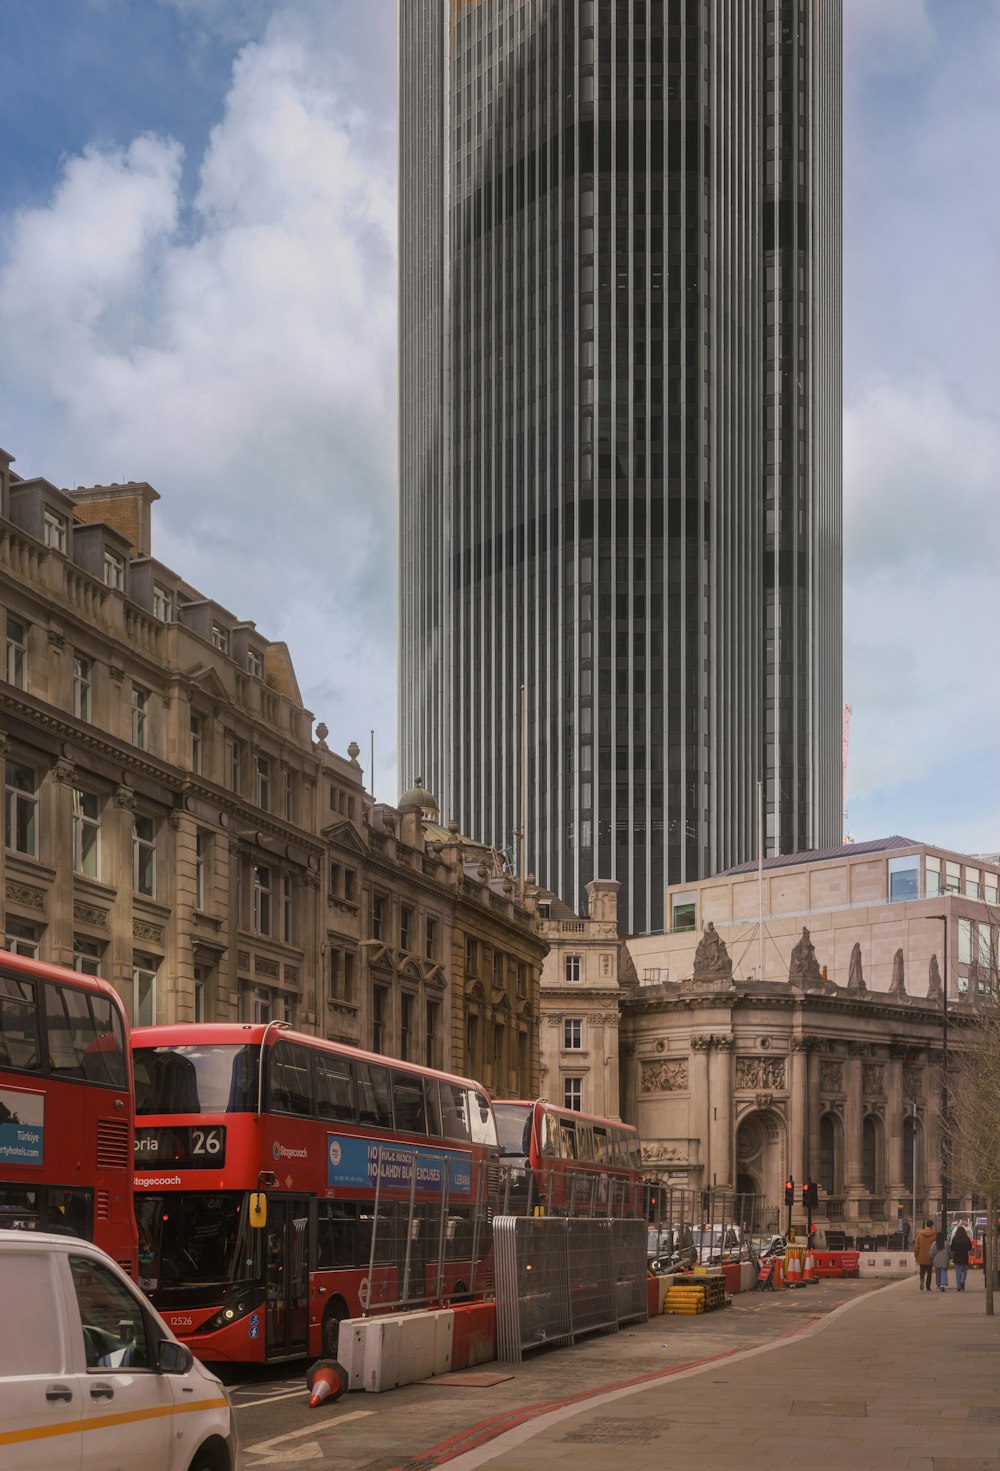 two double decker buses parked in front of a tall building